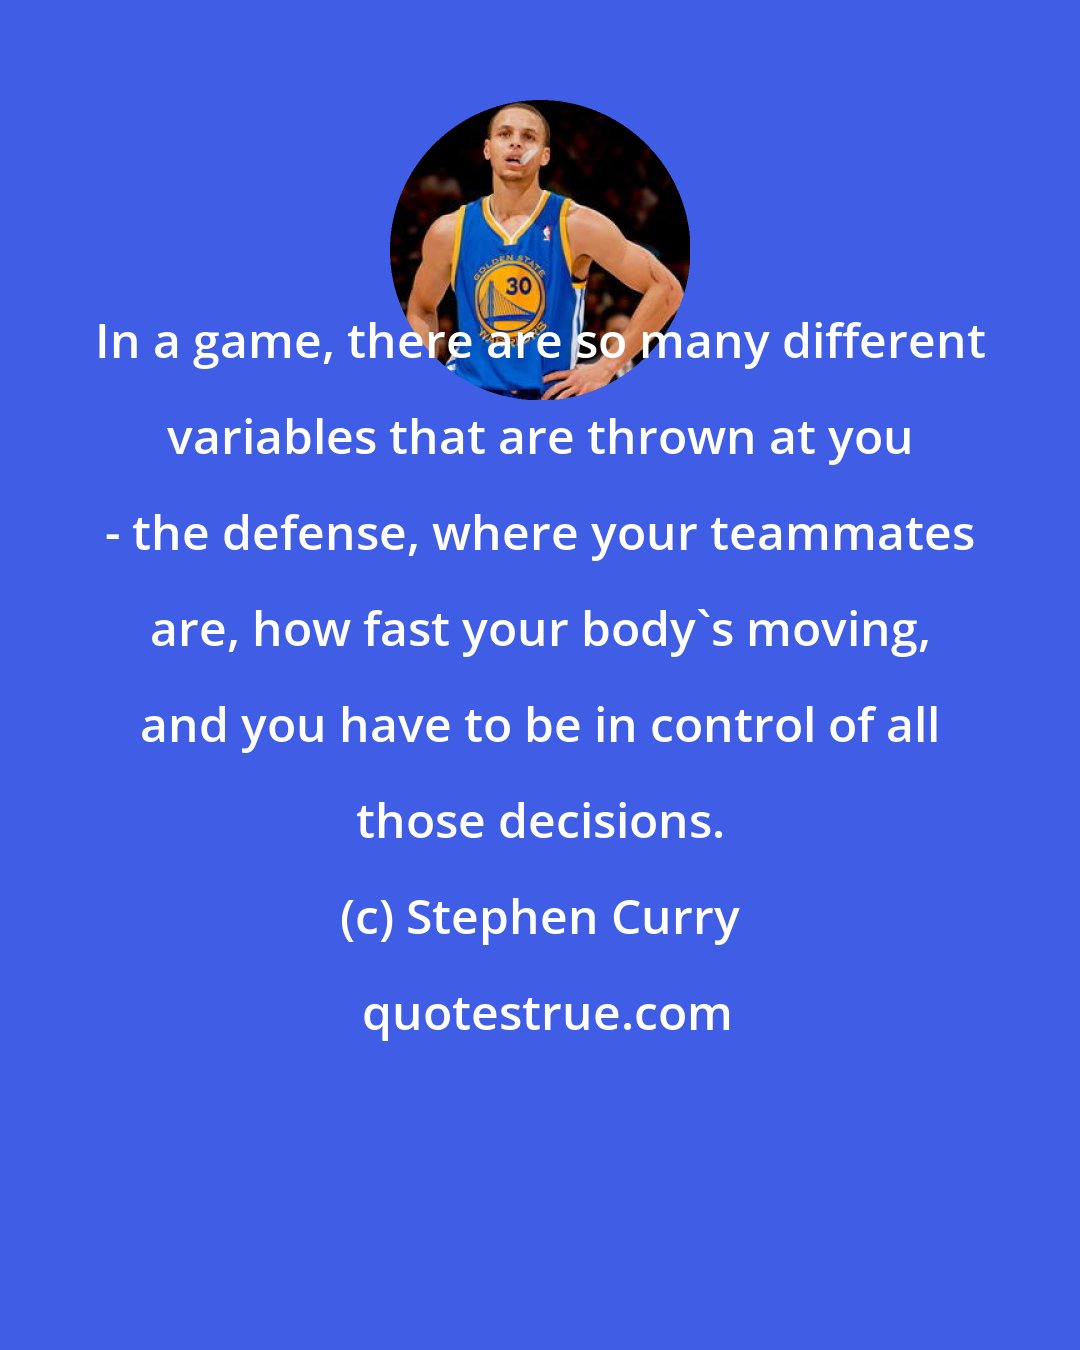 Stephen Curry: In a game, there are so many different variables that are thrown at you - the defense, where your teammates are, how fast your body's moving, and you have to be in control of all those decisions.